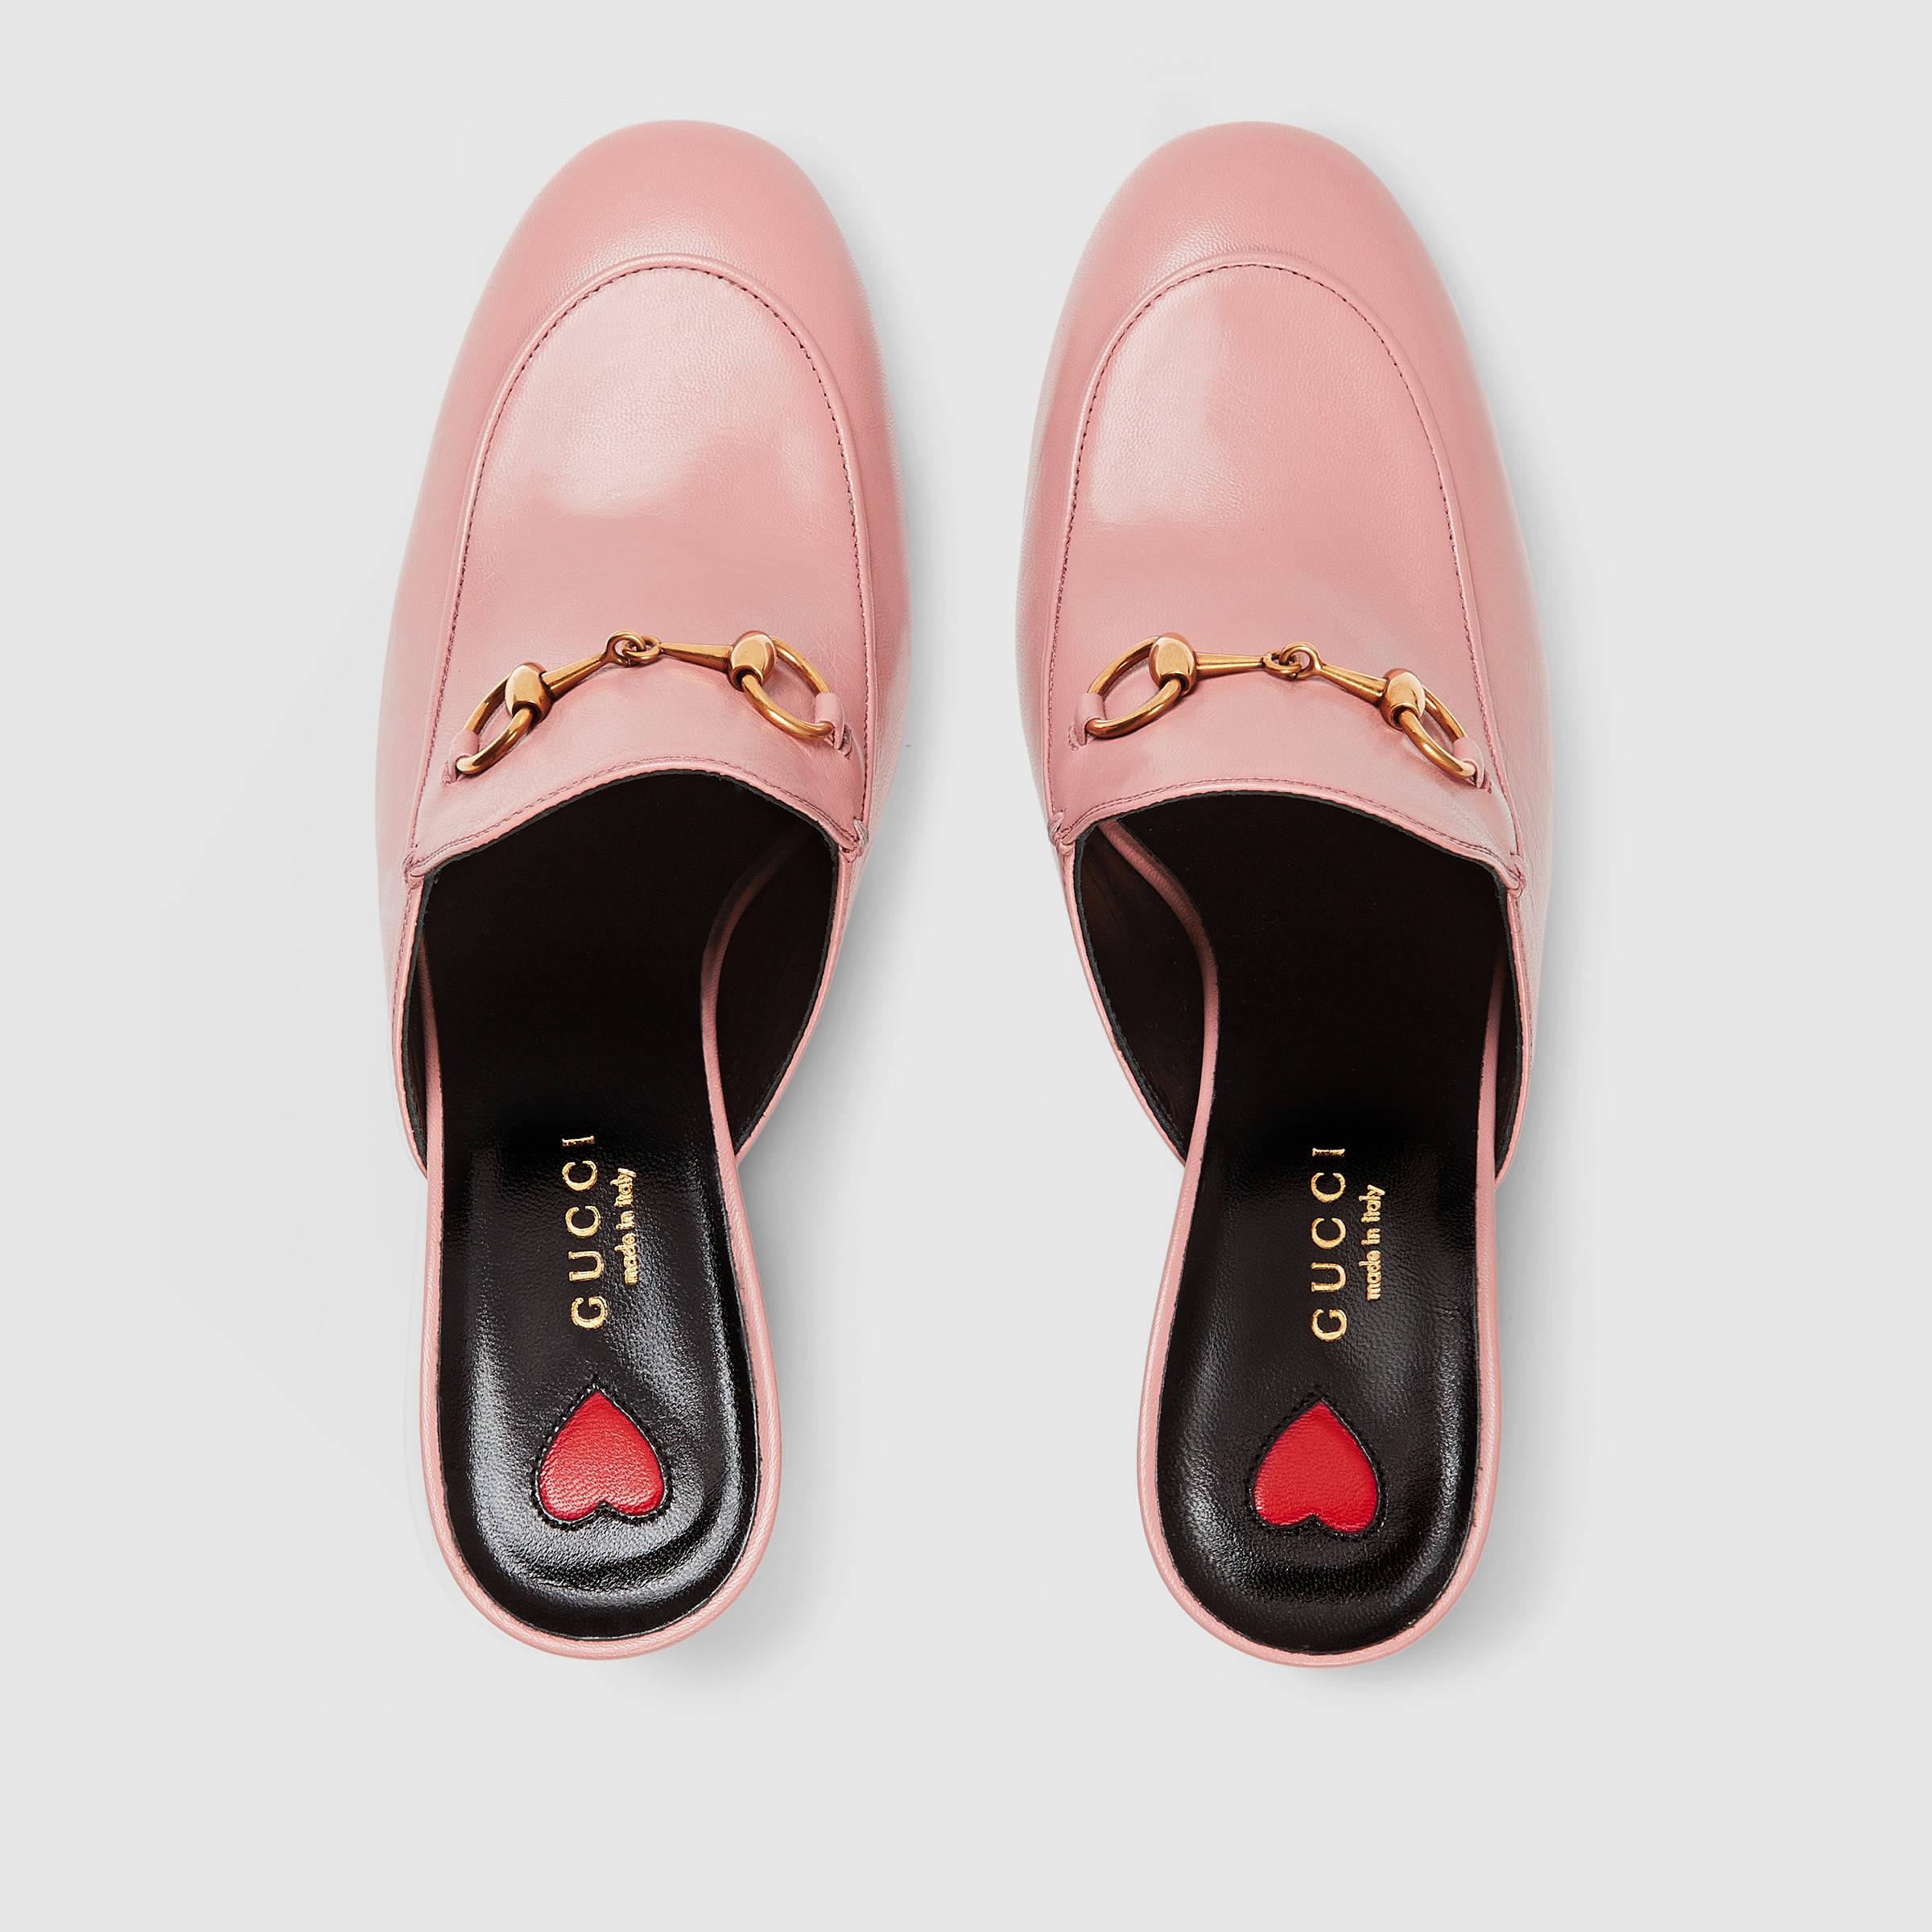 Gucci Princetown Leather Mules in Light 